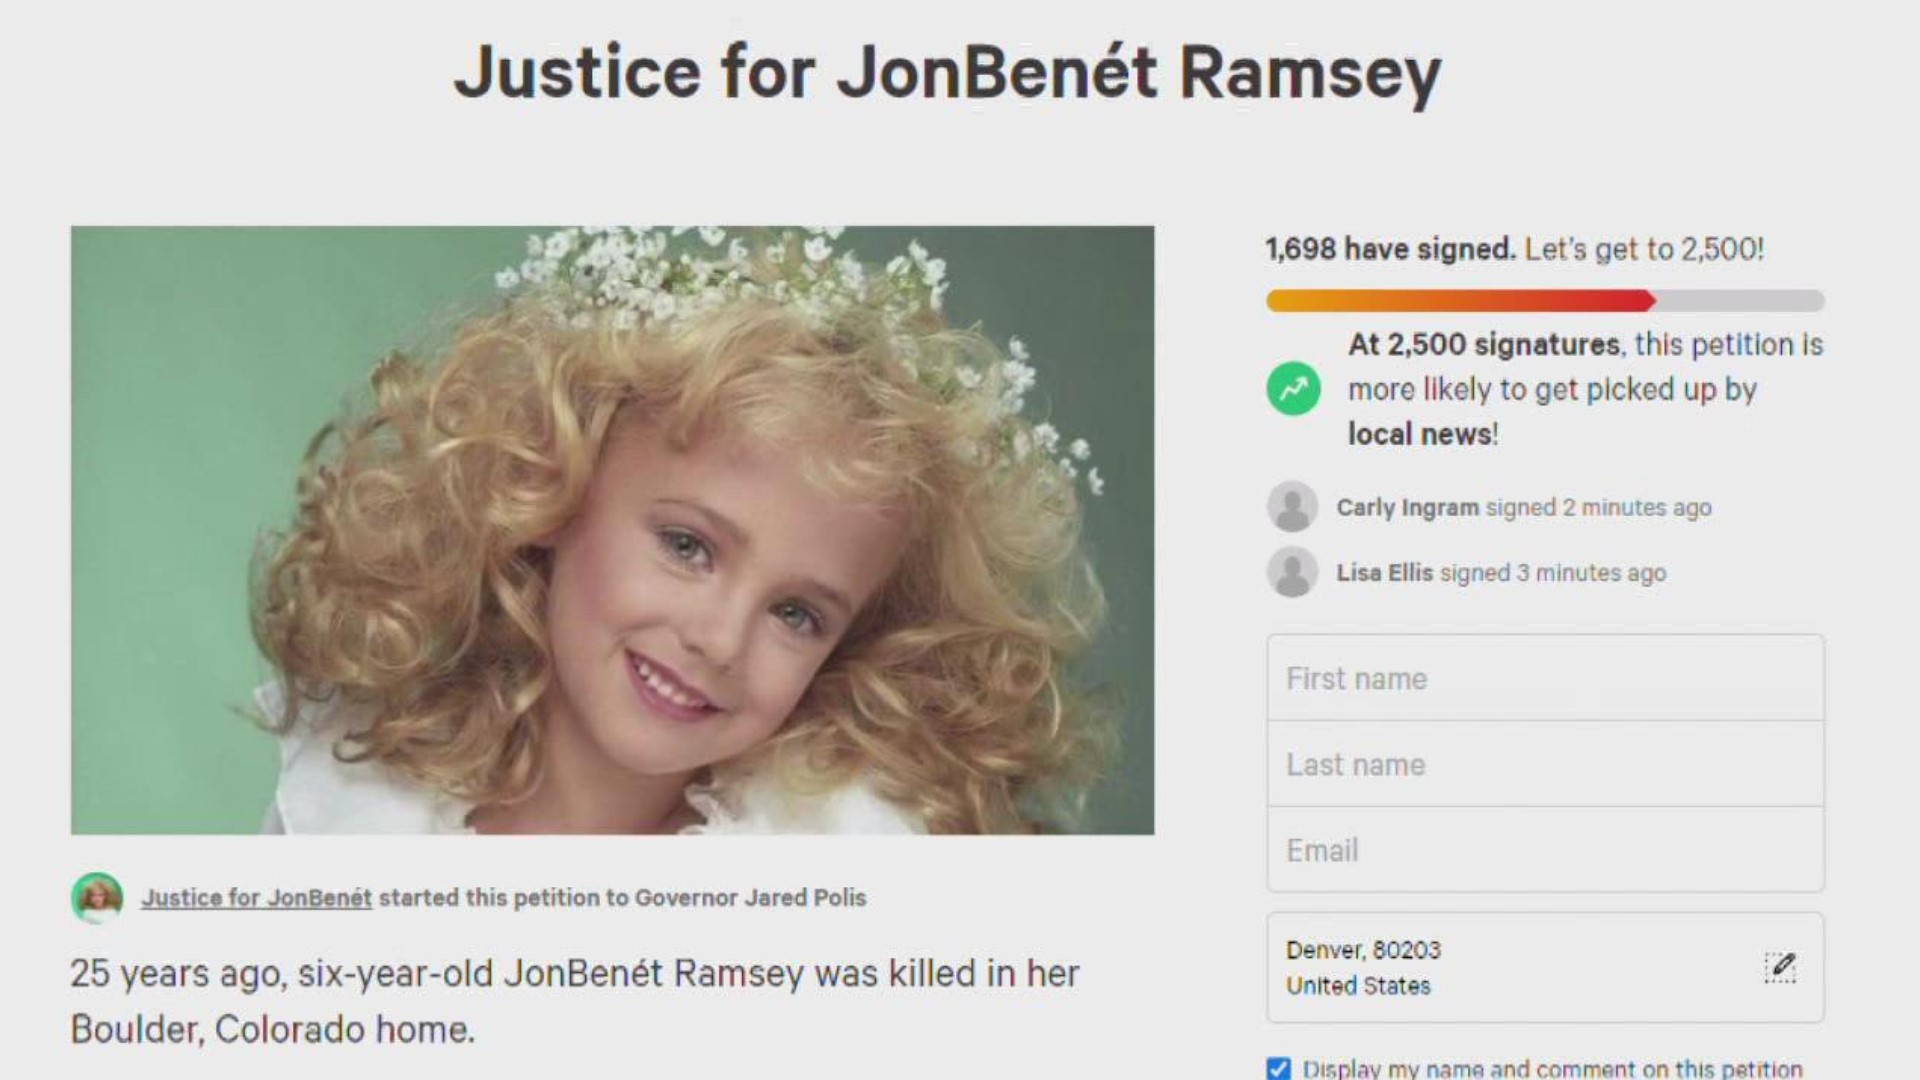 JonBenét's father John Ramsey told 9NEWS that he supports the petition.